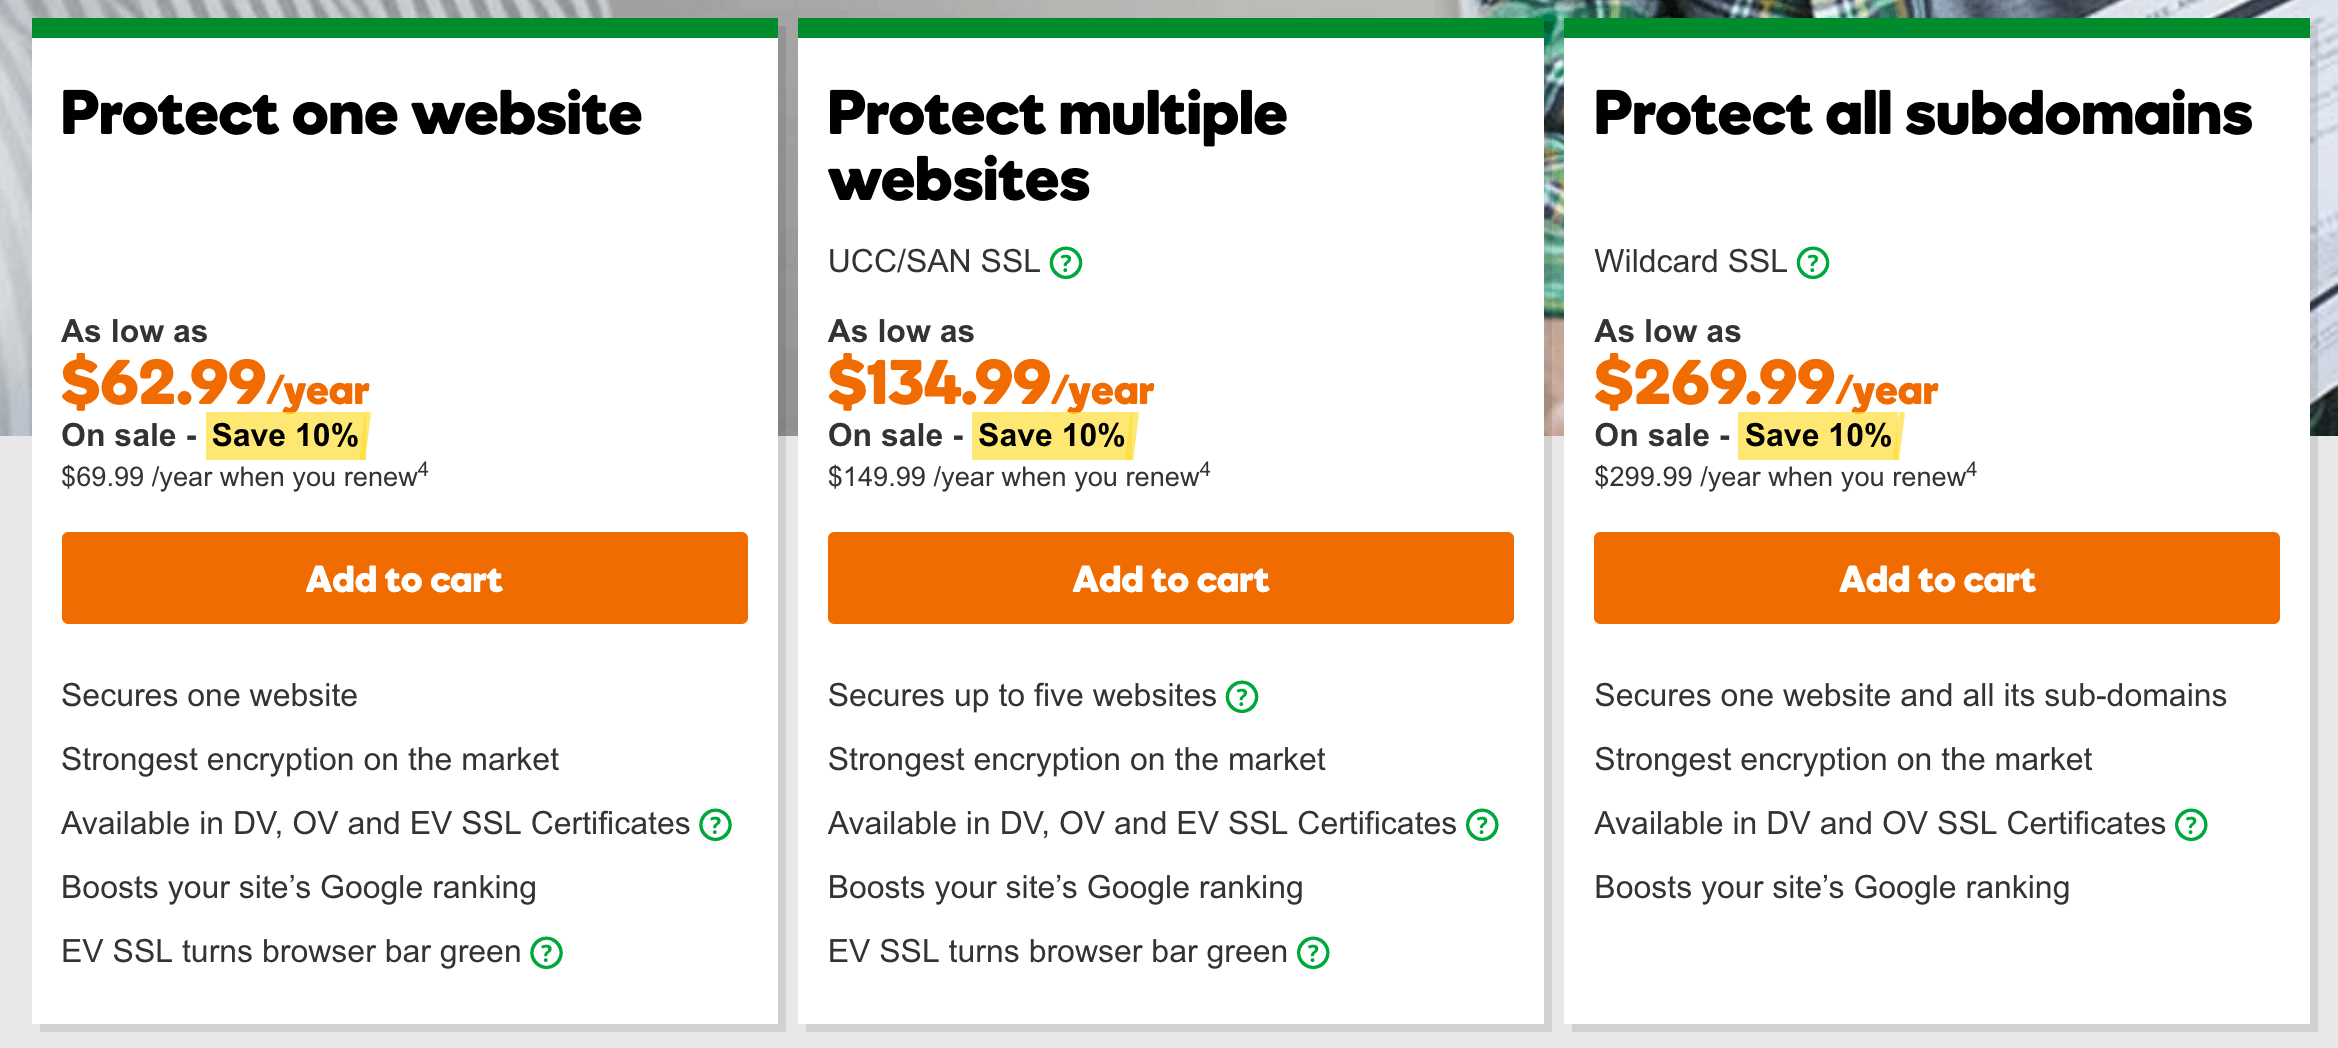 Do You Need an SSL Certificate because GoDaddy Says So?